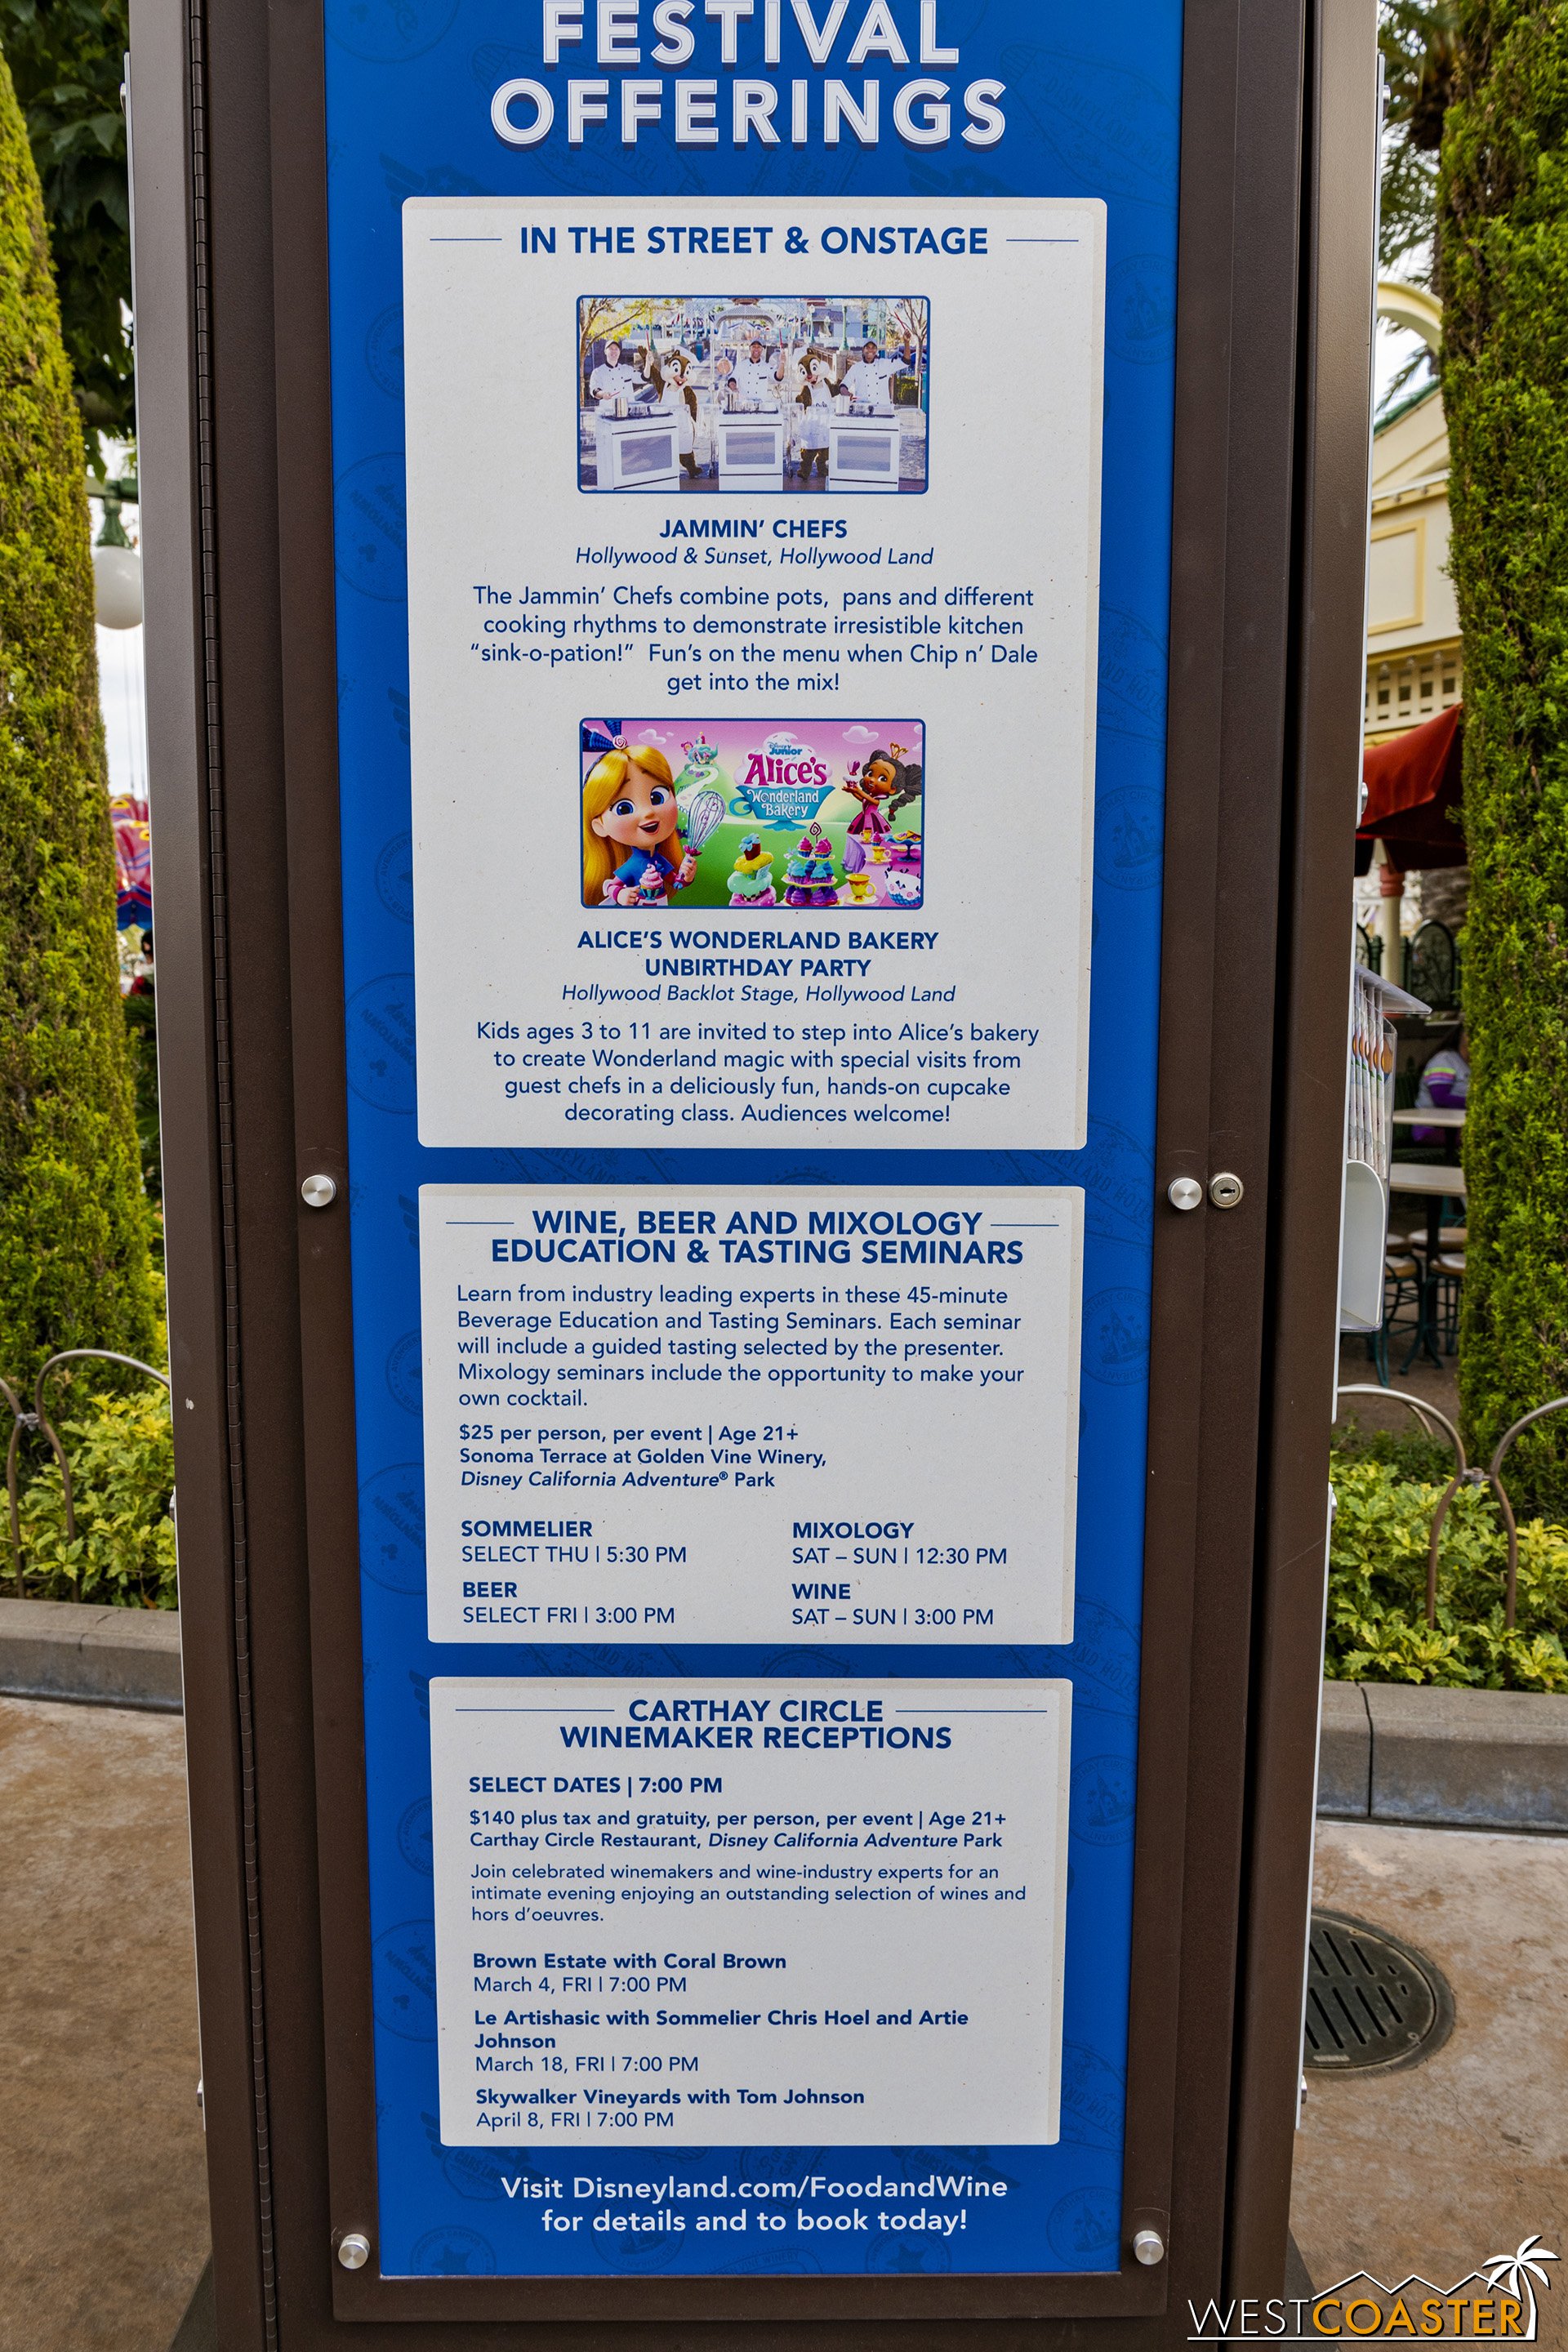  There are also some live shows in Hollywood Land, though I was unable to get photos of Jammin’ Chefs and Alice’s Wonderland Bakery Unbirthday Party. 